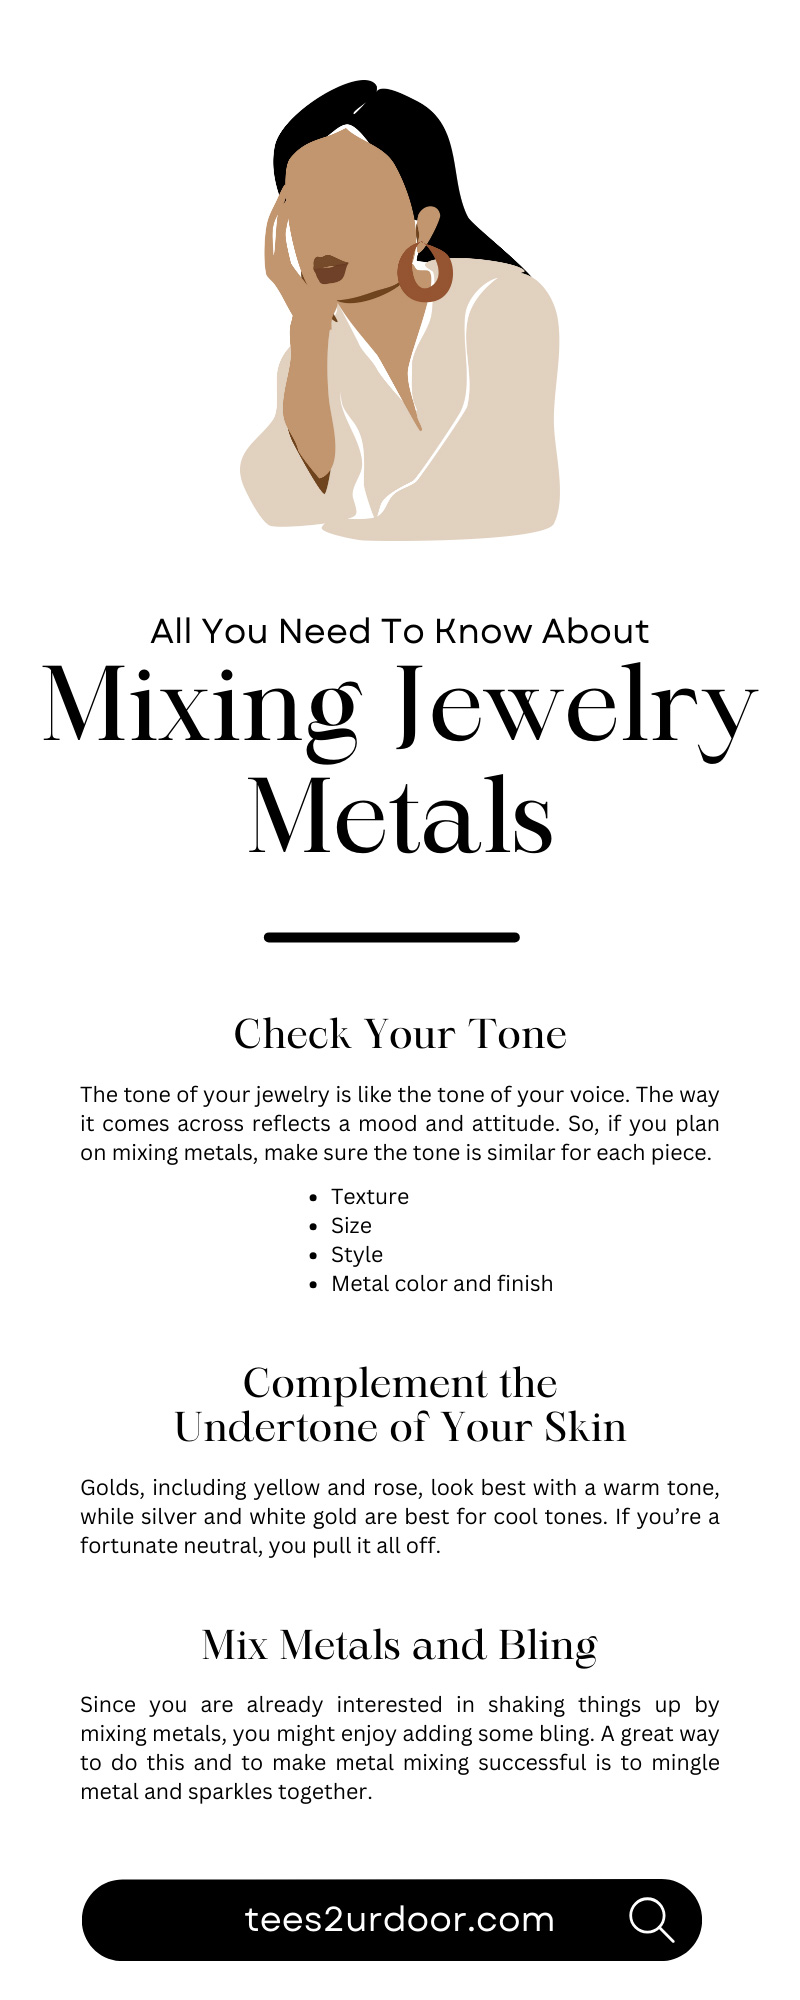 All You Need To Know About Mixing Jewelry Metals